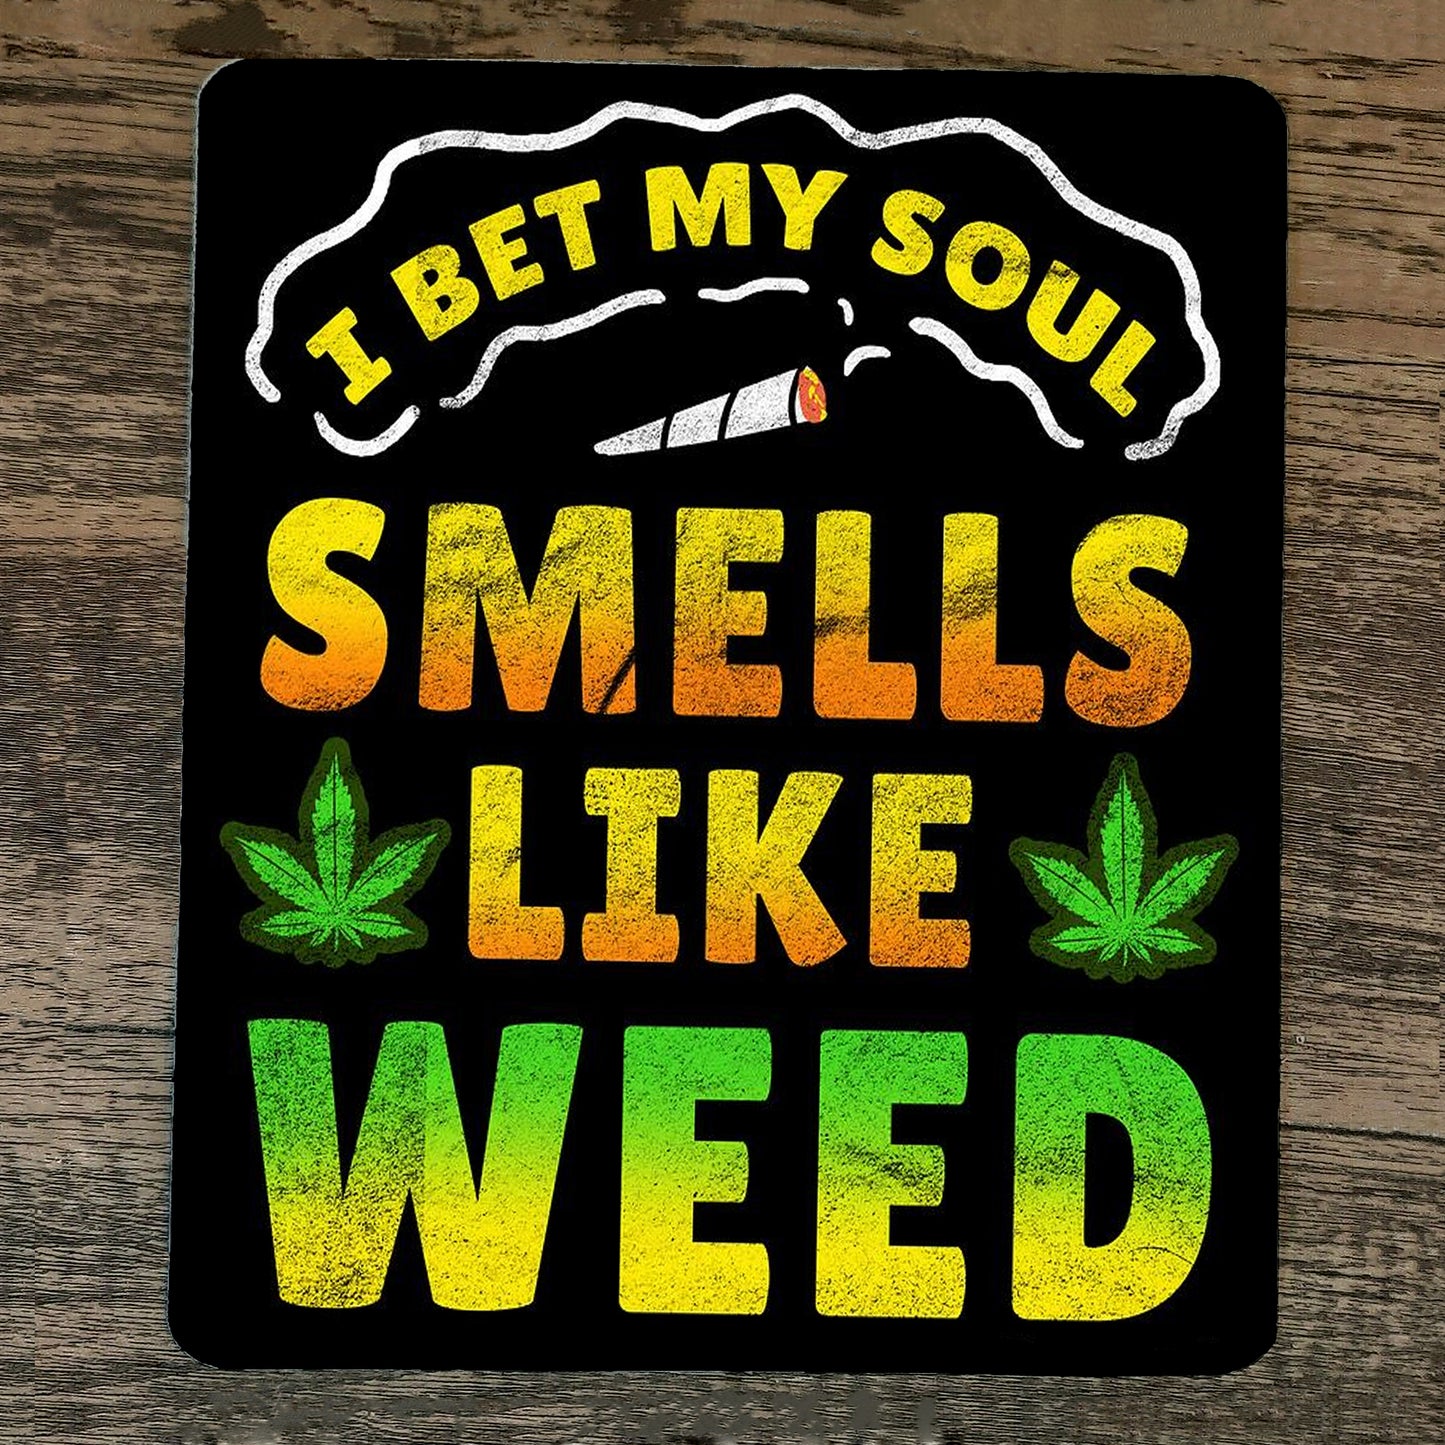 Bundle of Budz 5 Mary Jane 420 Weed 8x12 Metal Walls Signs and Mouse pad